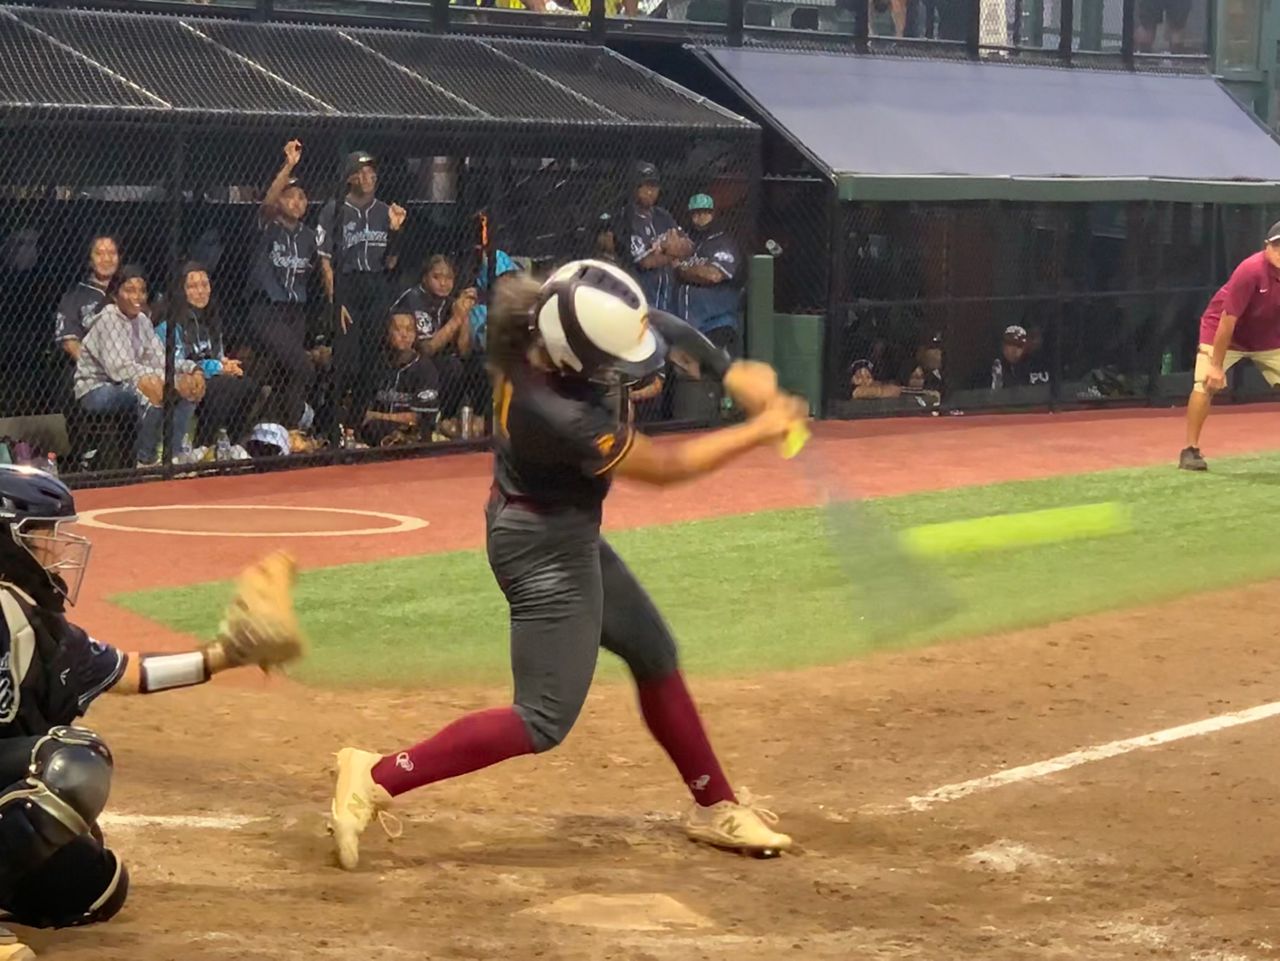 AllILH state softball final between Iolani and Maryknoll